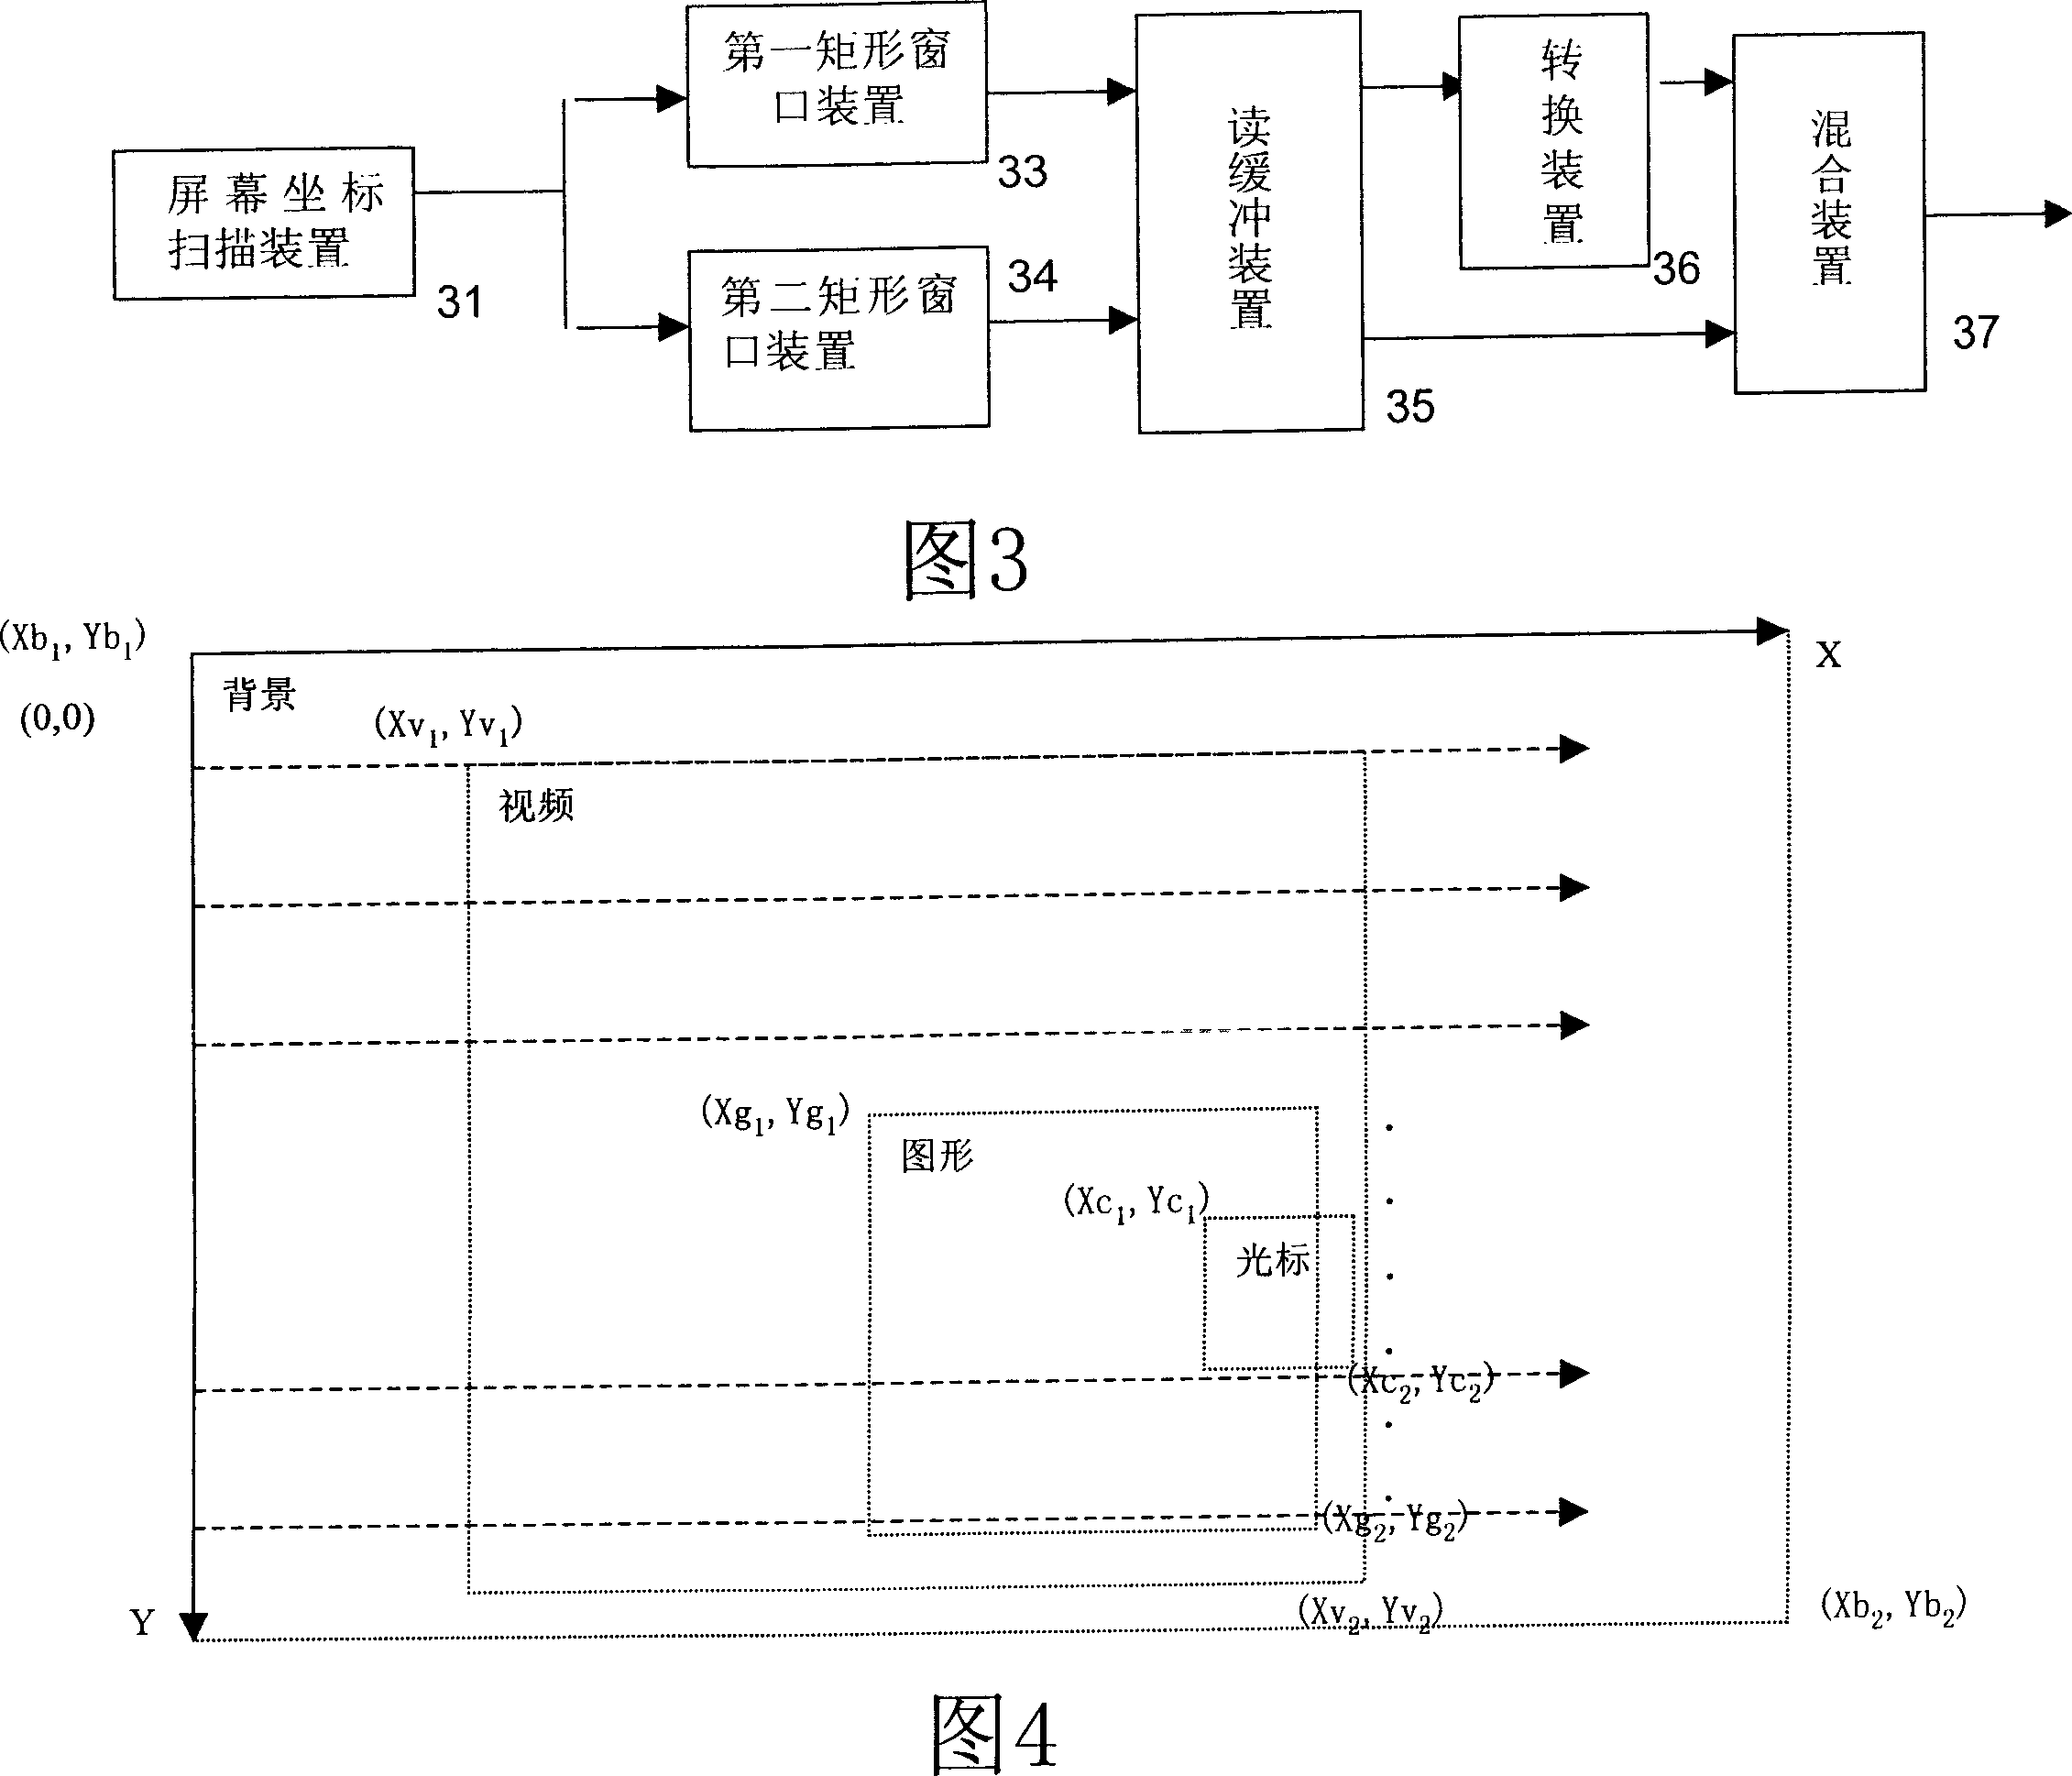 Screen display mixing system and method